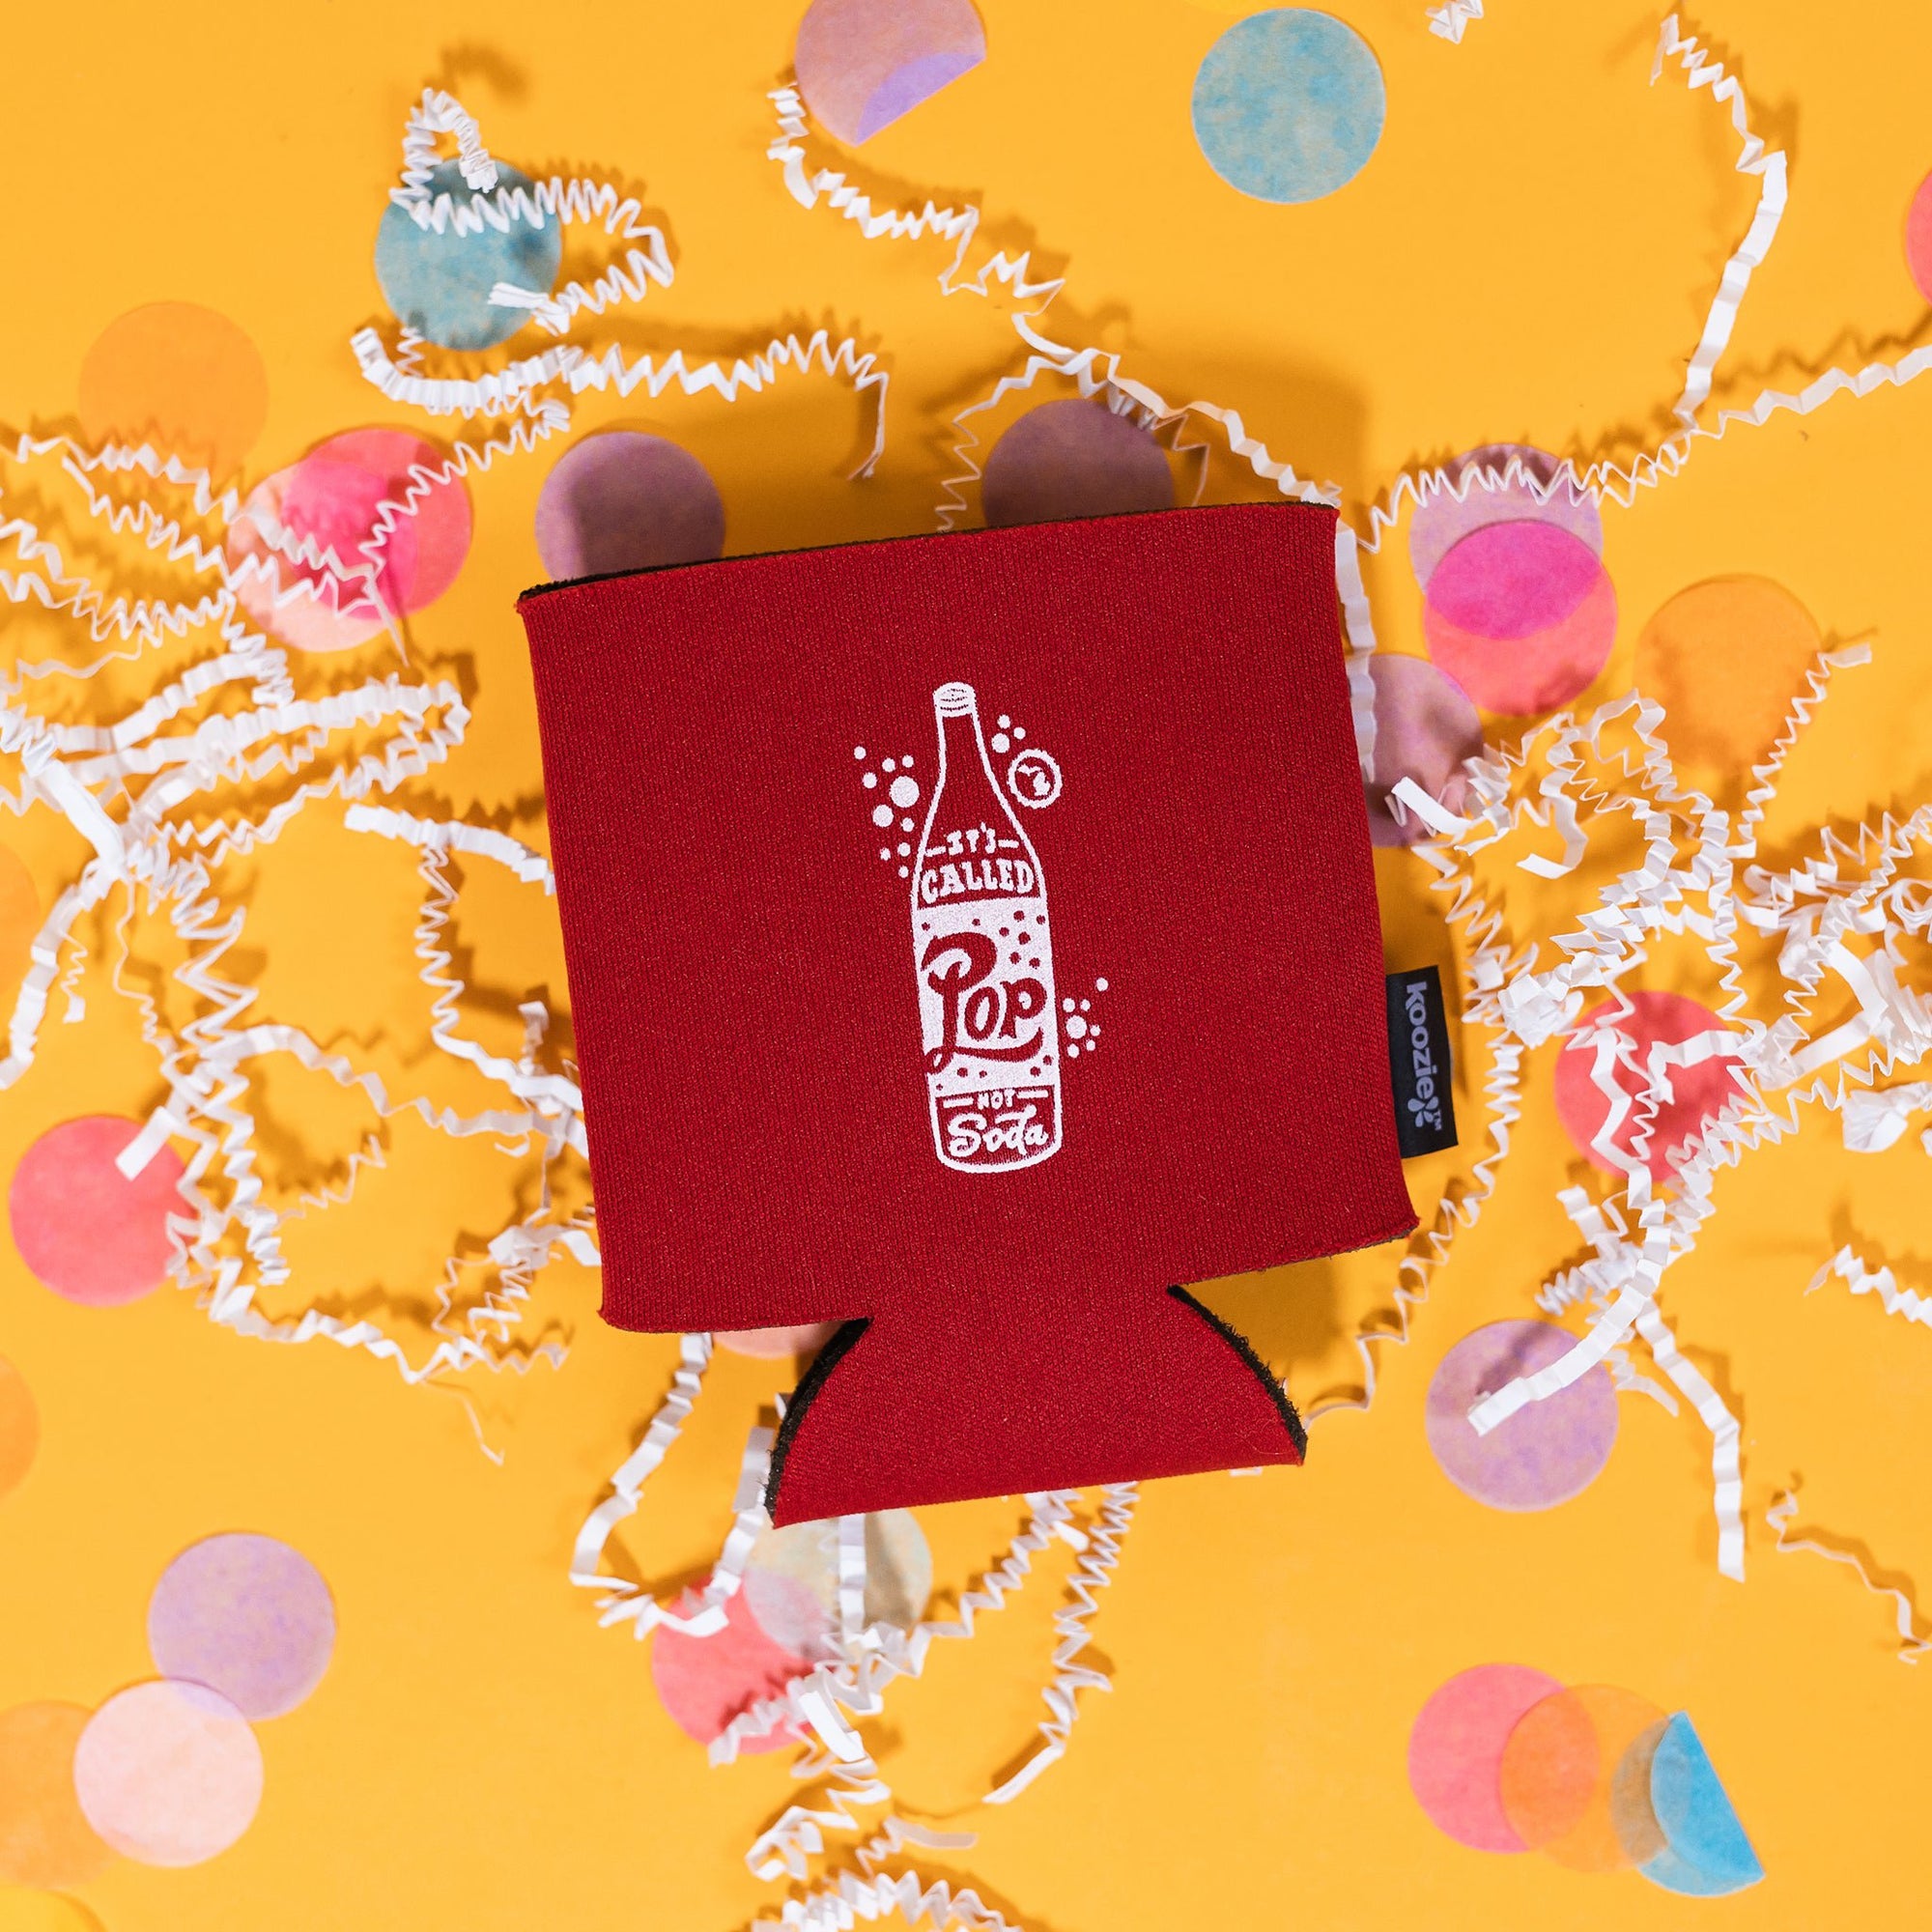 On a sunny mustard background sits a koozie with white crinkle and big, colorful confetti scattered around. The red koozie has a white handdrawn illustration of a pop with handdrawn lettering that says "It's Called Pop Not Soda."